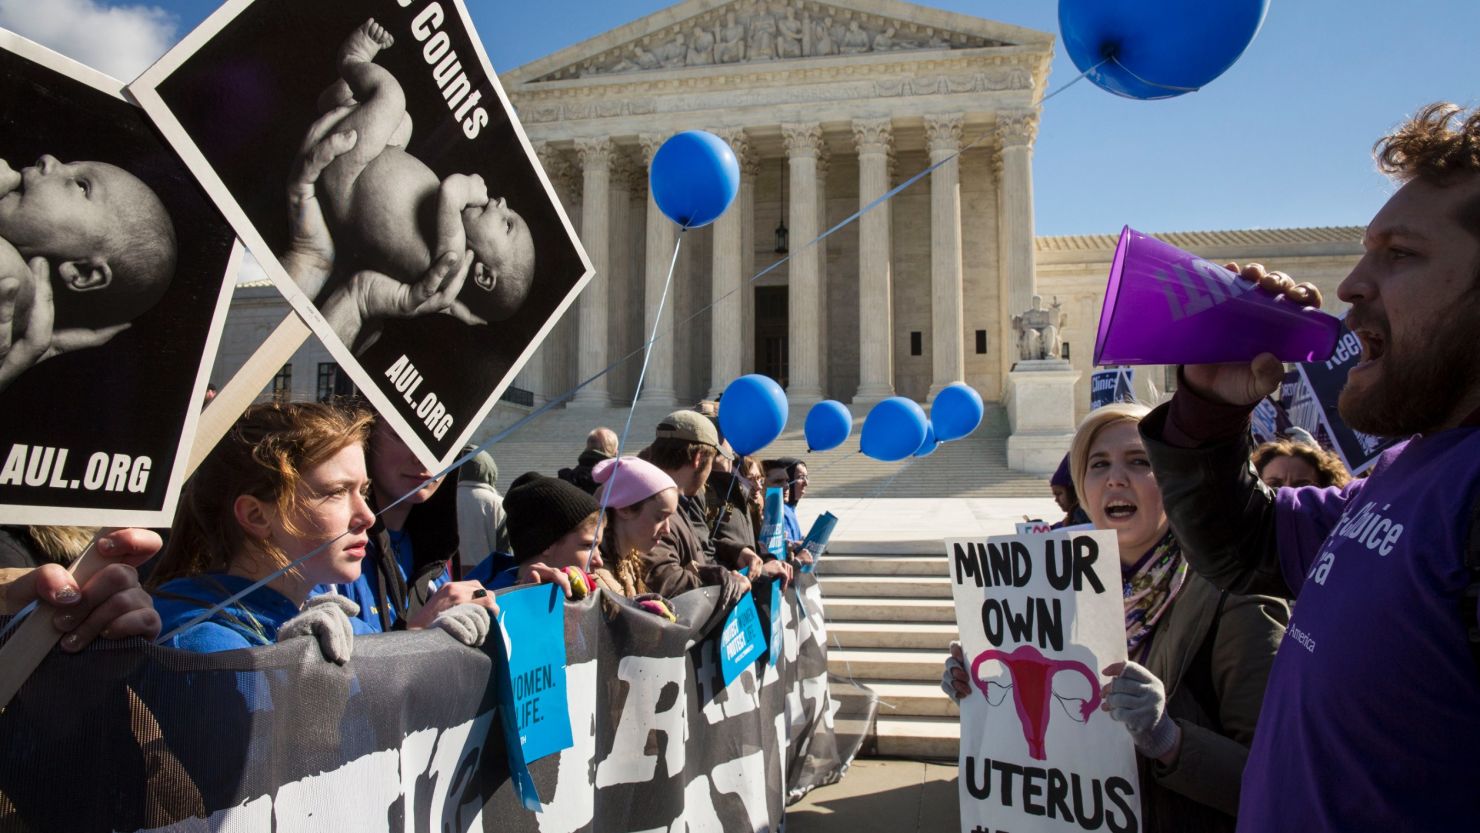 Pro-choice advocates and anti-abortion advocates rally outside of the Supreme Court